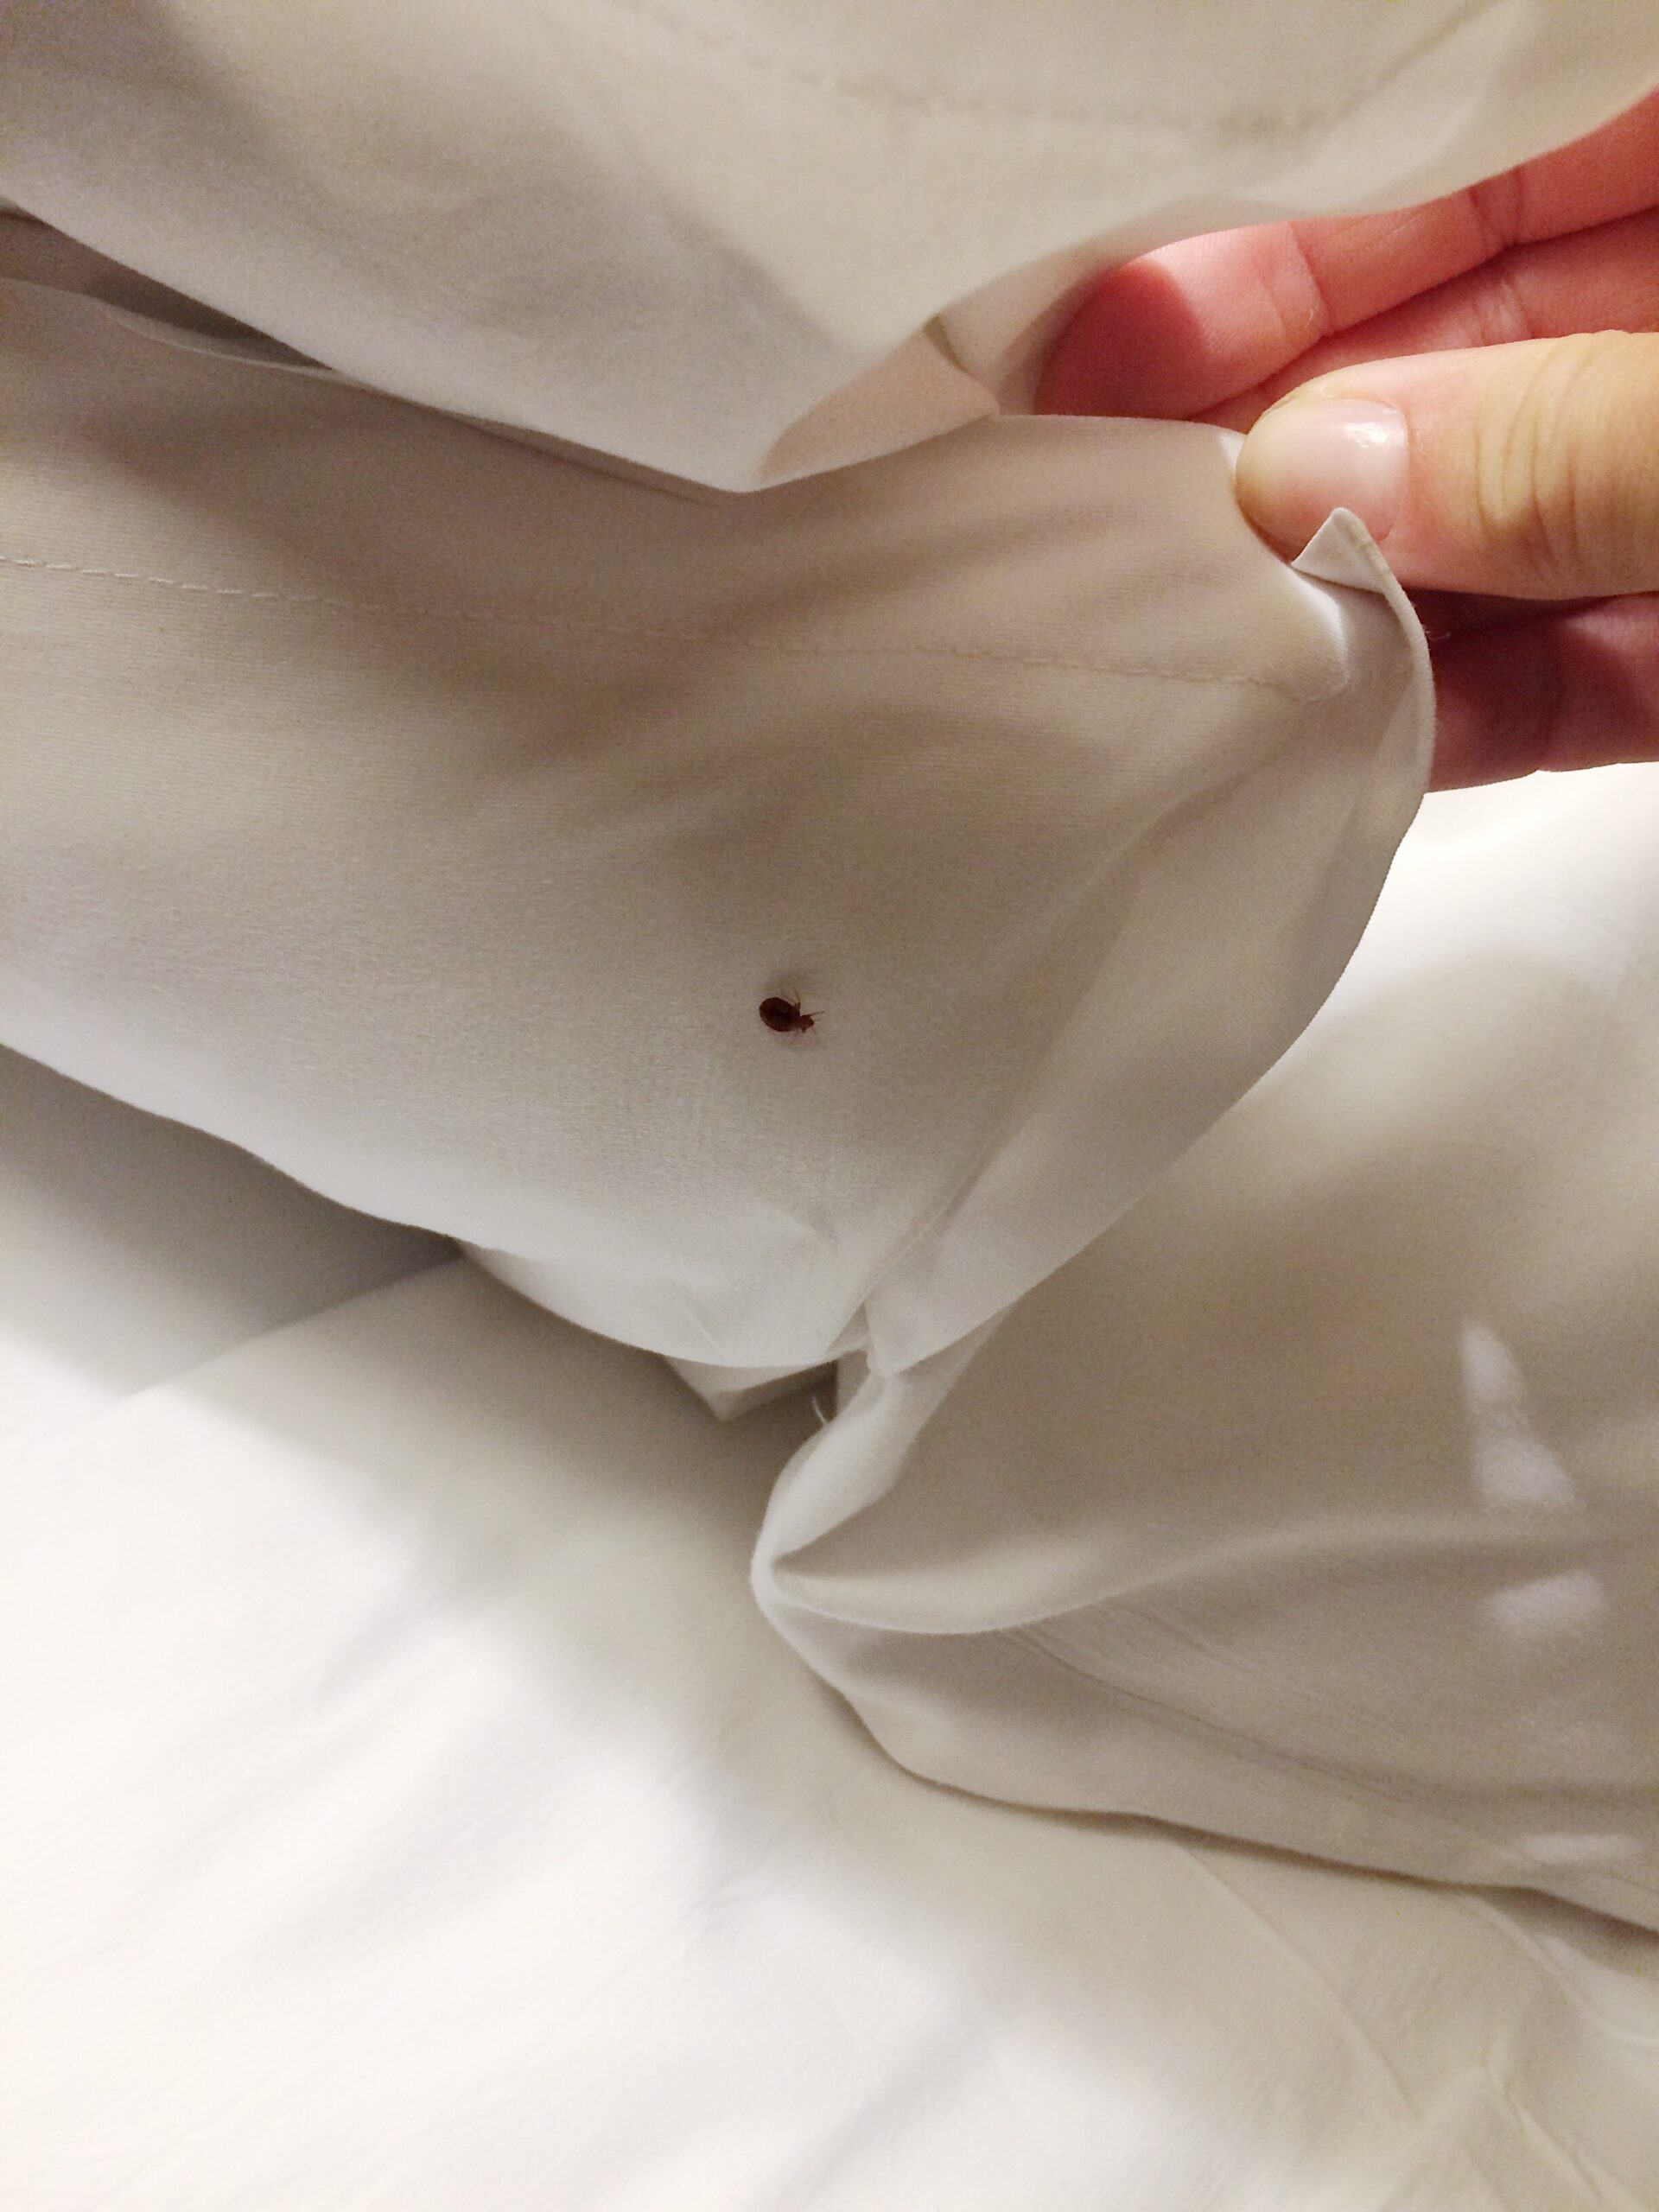 Bed Bugs Under the Blanket